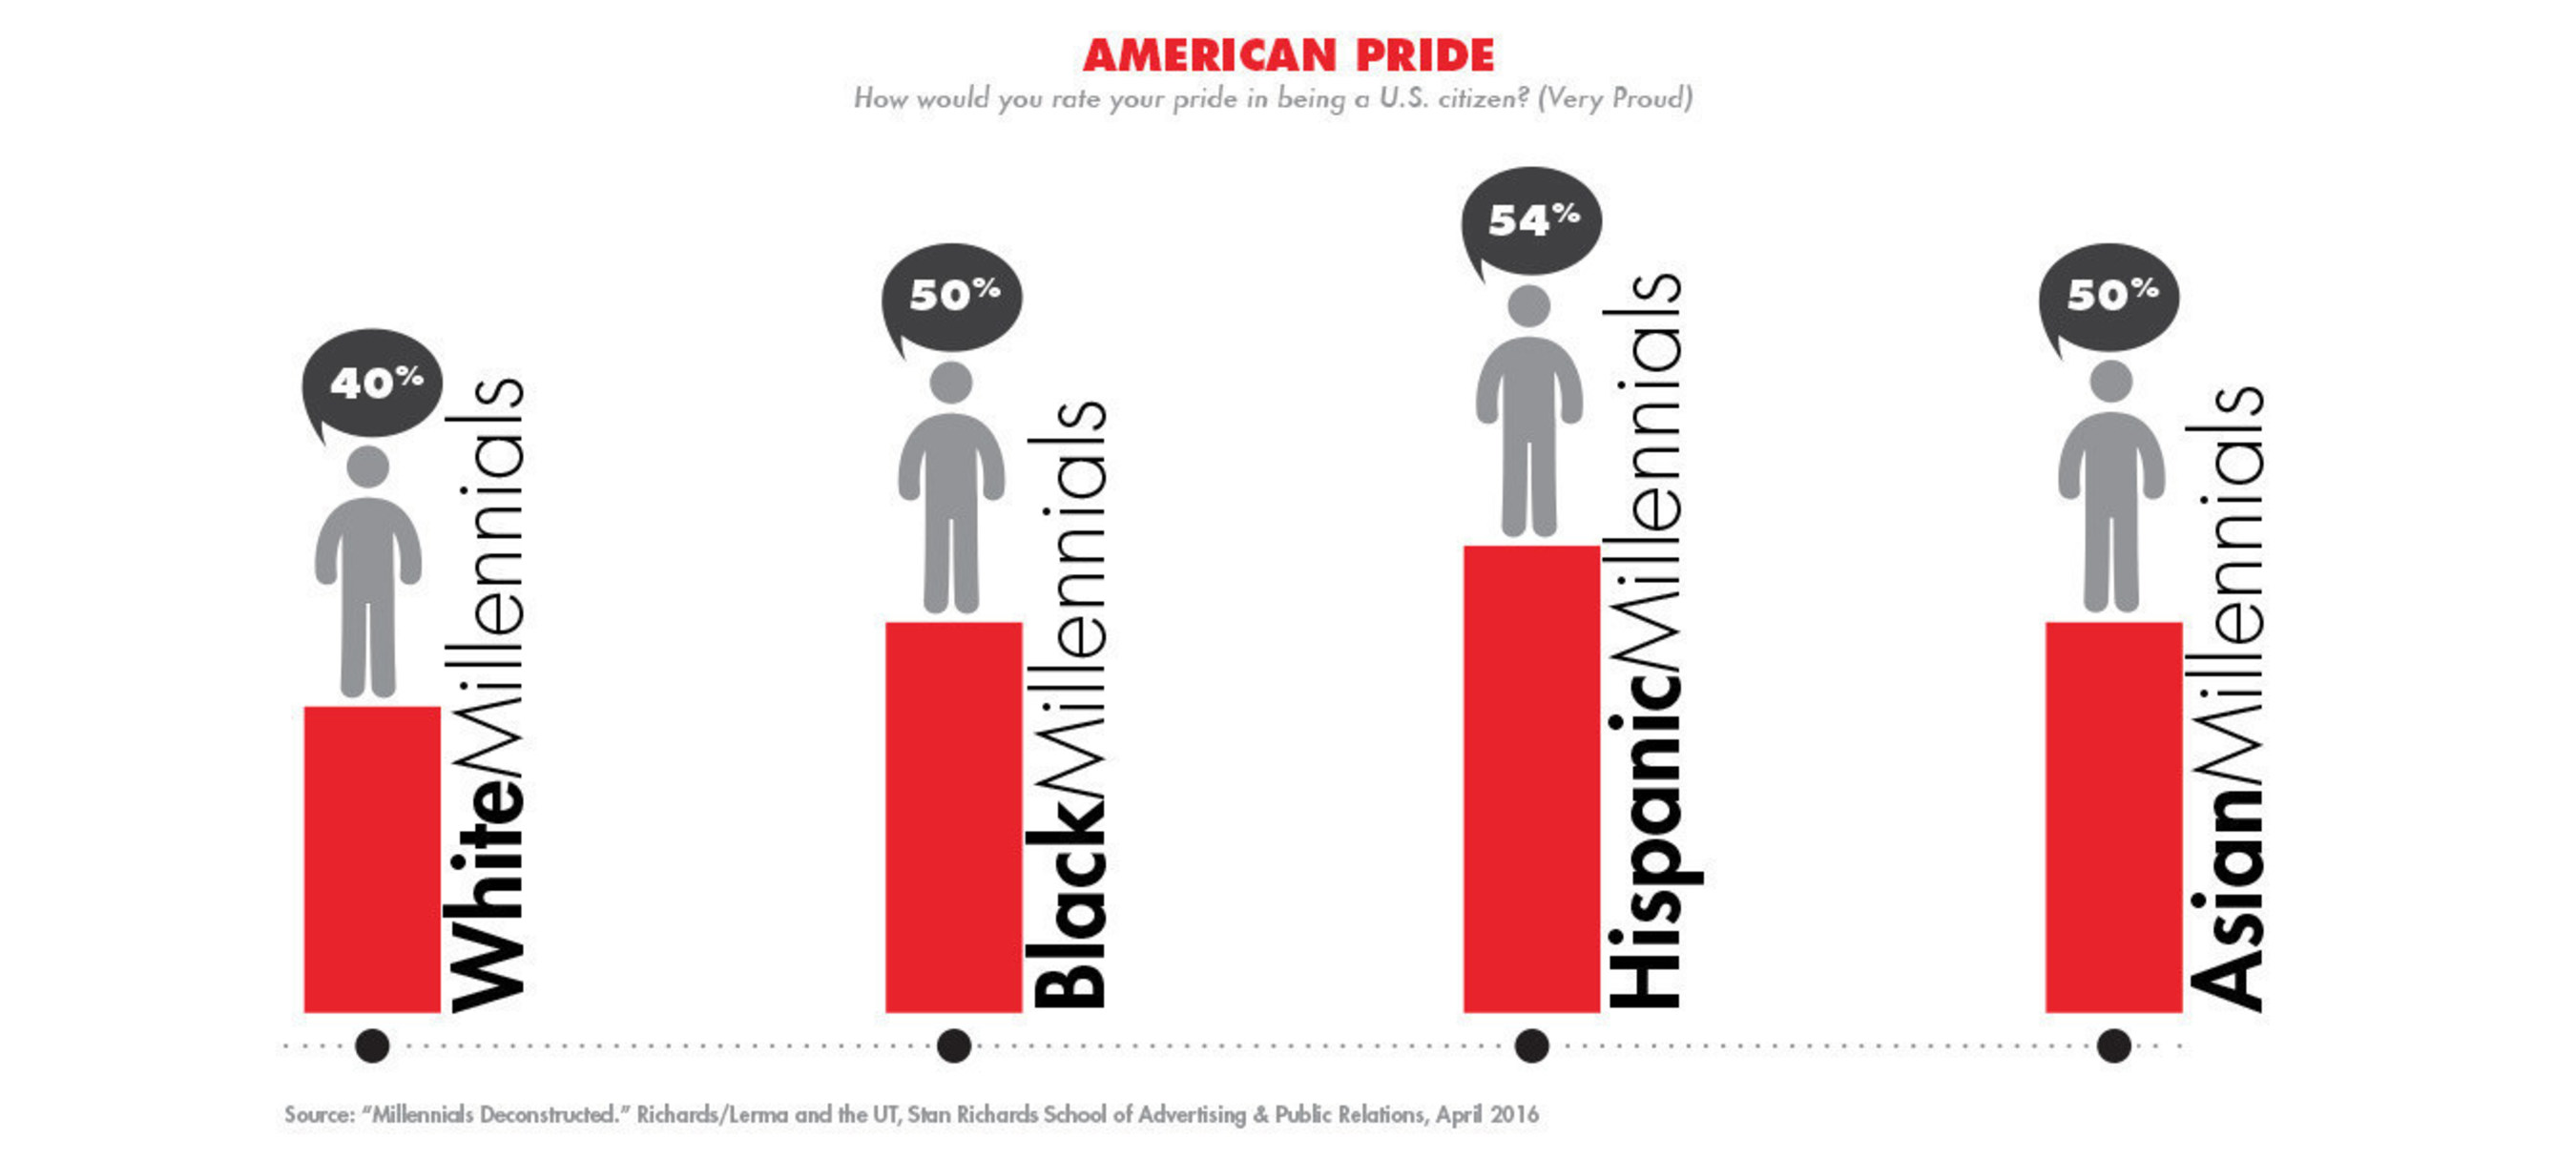 American Pride: How would you rate your pride in being a U.S. Citizen?